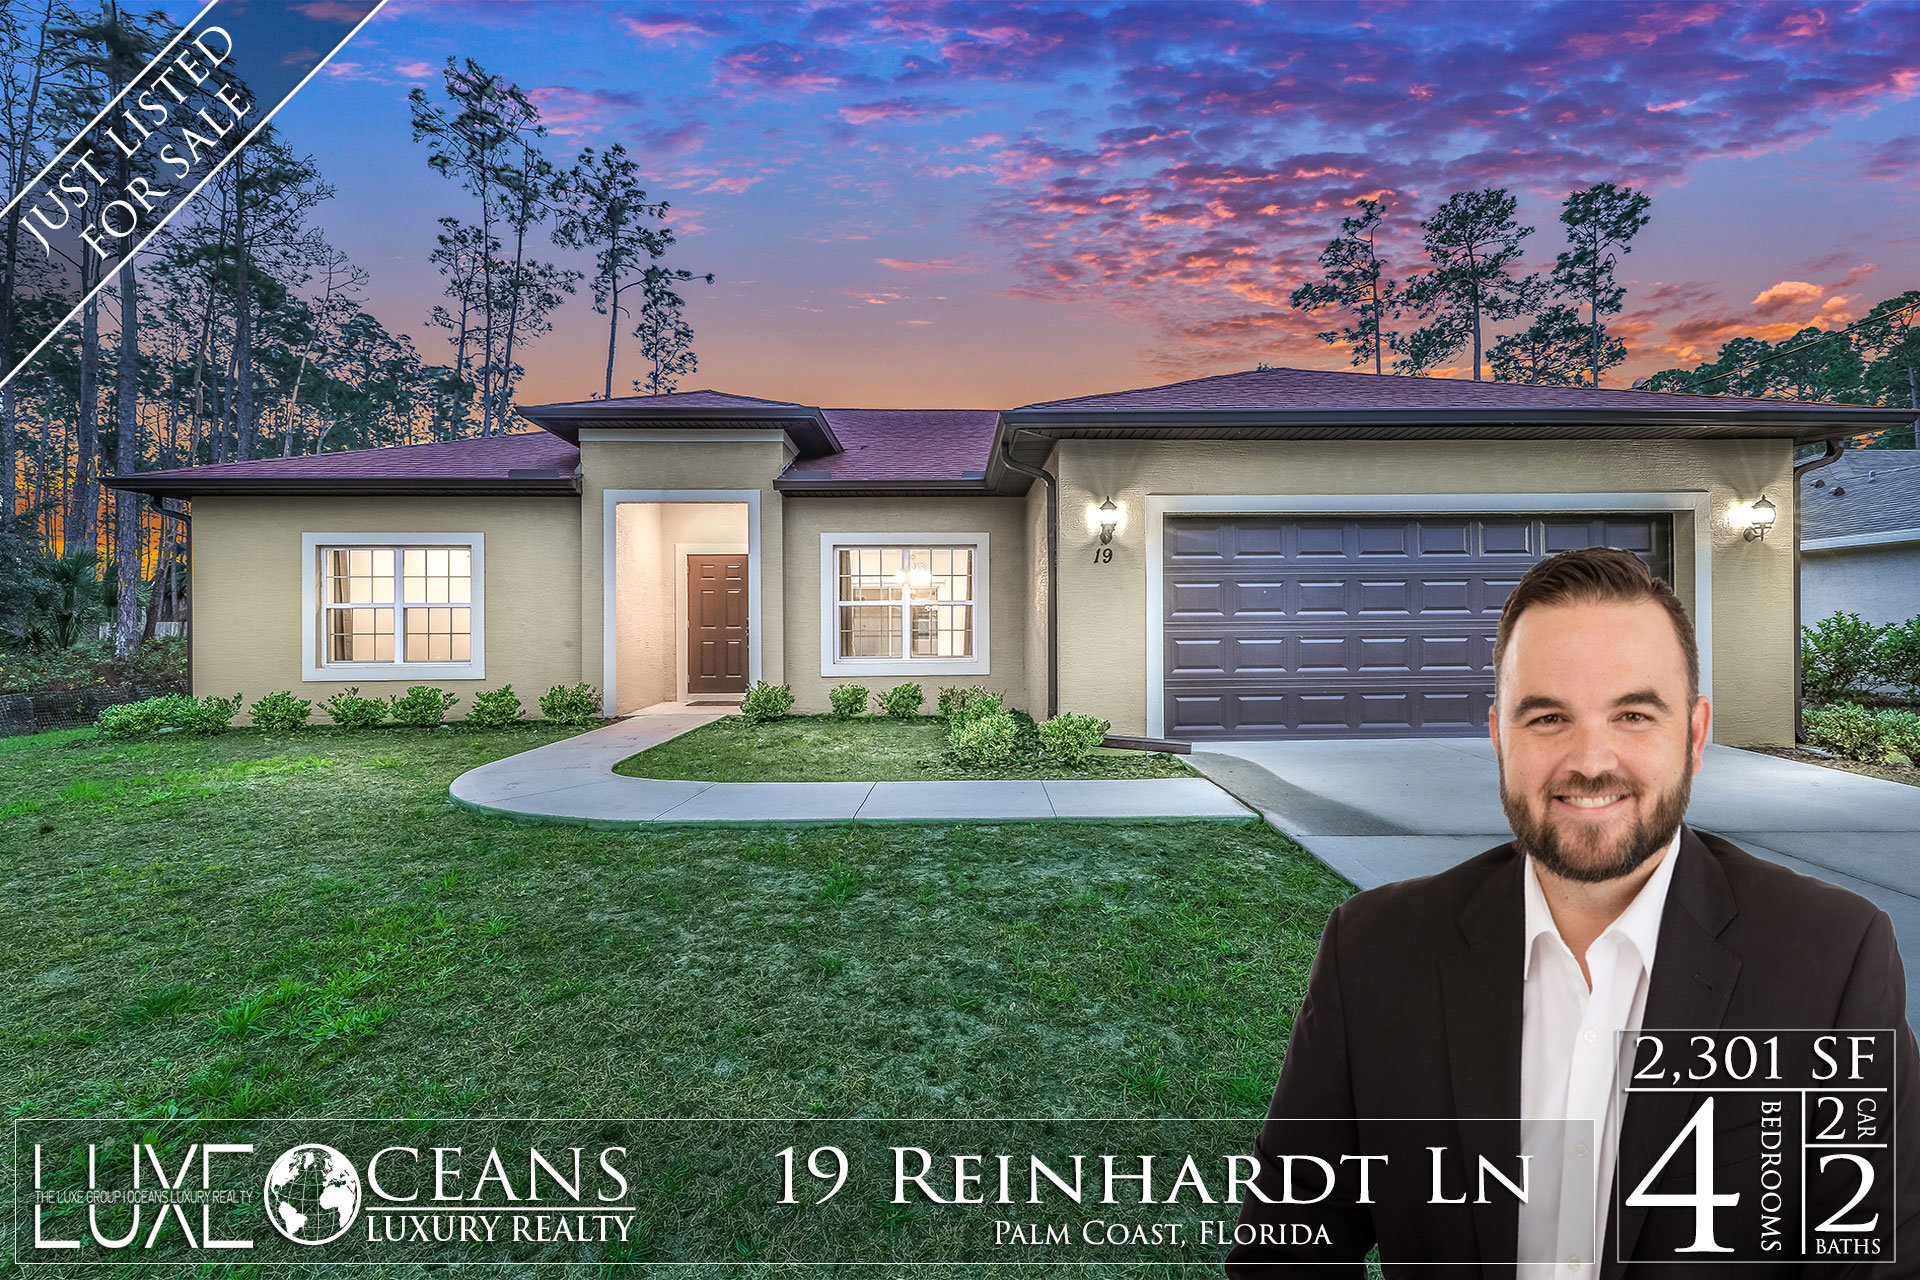 Palm Coast Real Estate Under Contract.  19 Reinhardt Lane Just sold!